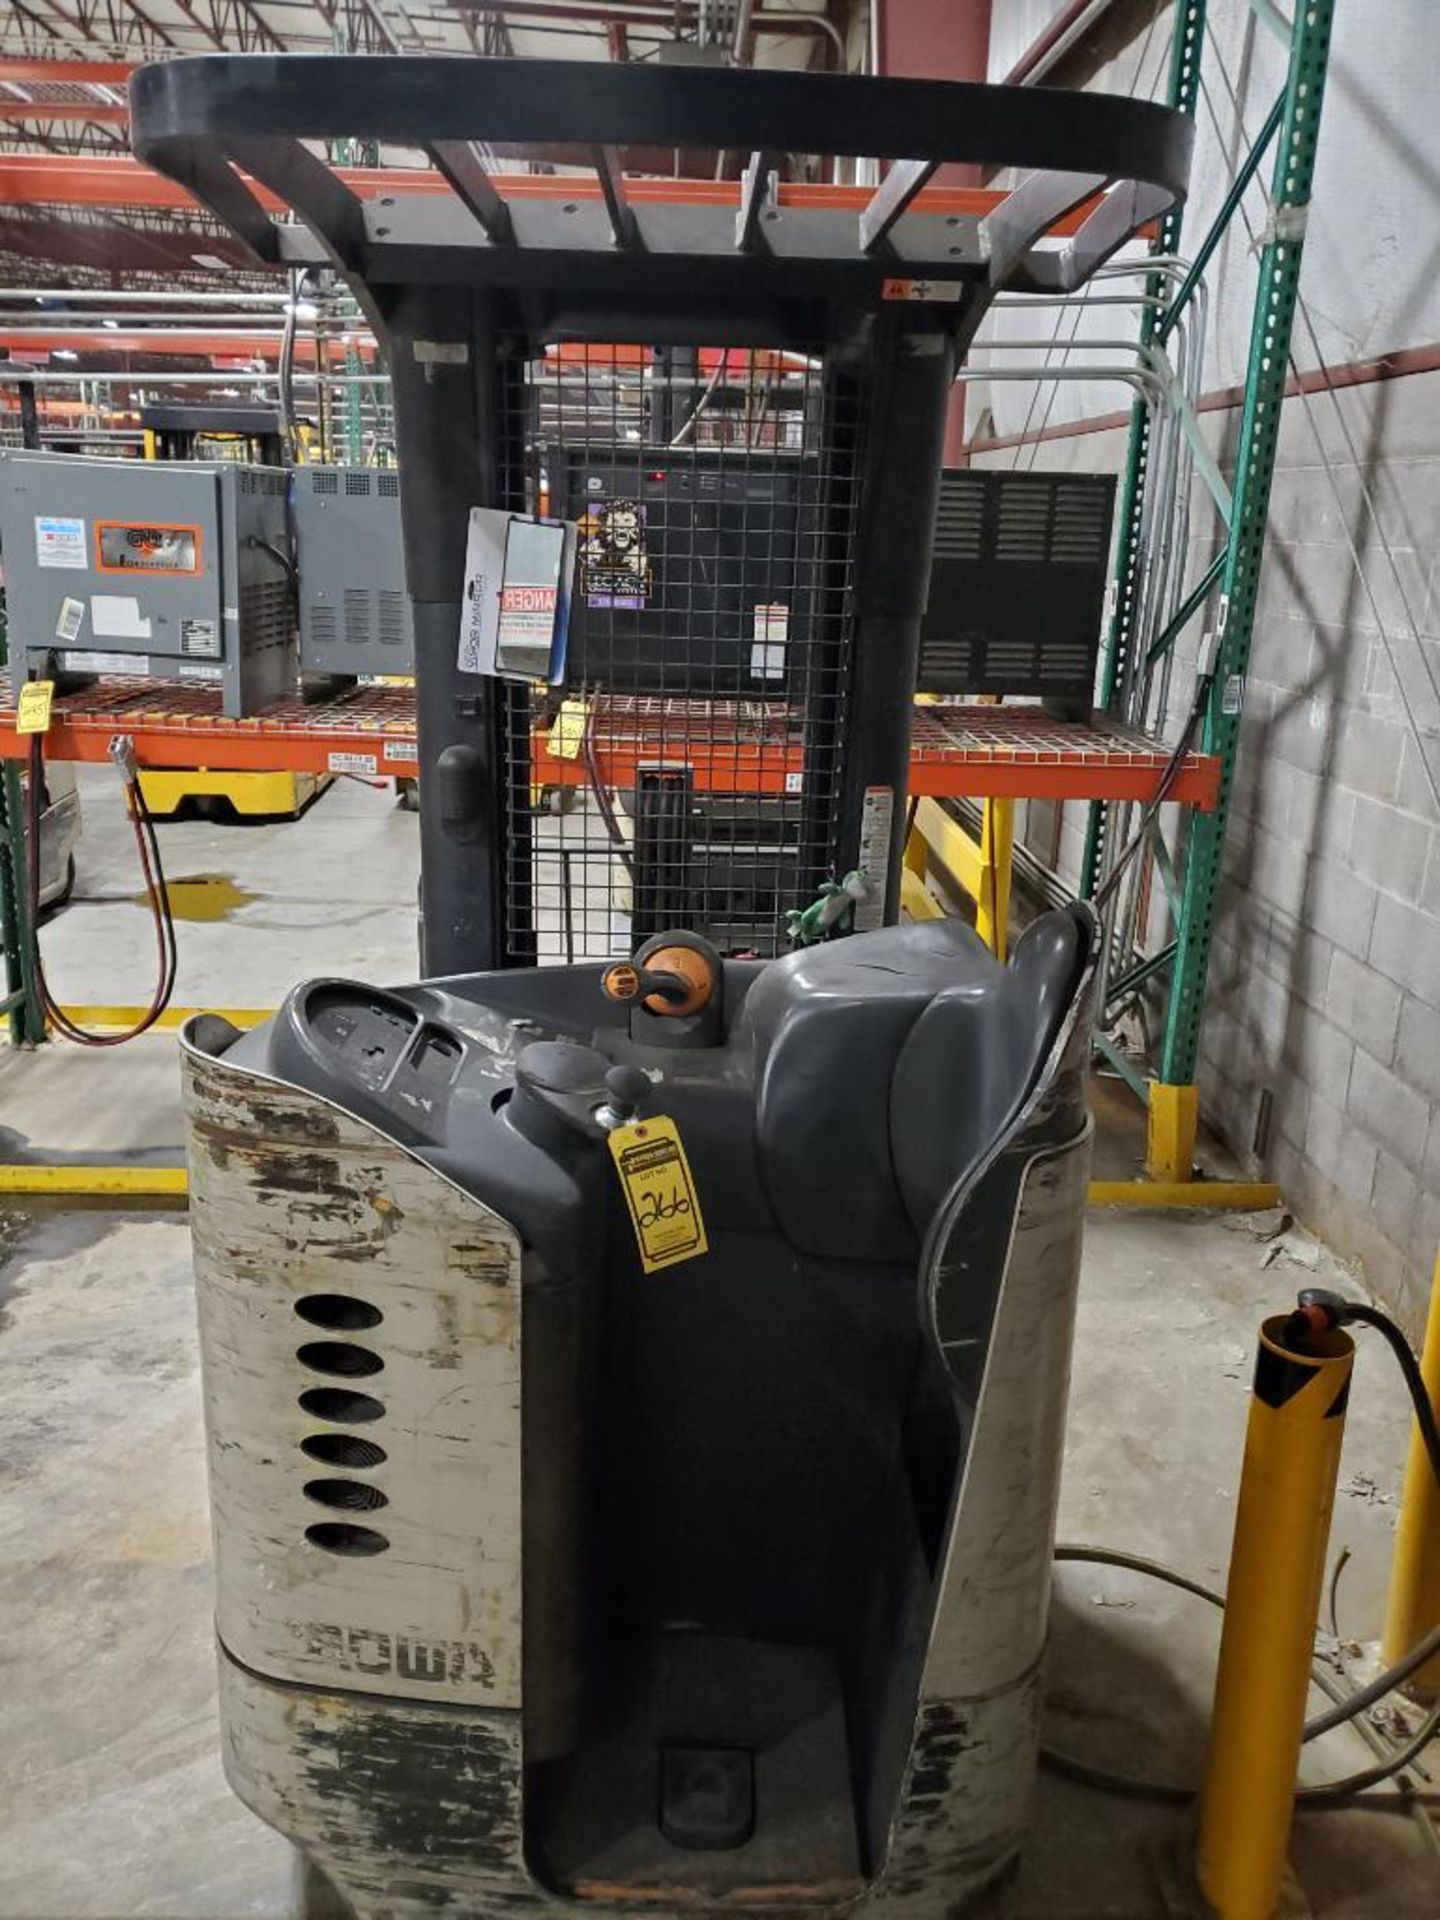 2006 Crown 5200 Series Electric Reach Truck, Model RR5220-35, S/N 1A301759, 36V, 3,500 Lb. Capacity, - Image 5 of 11